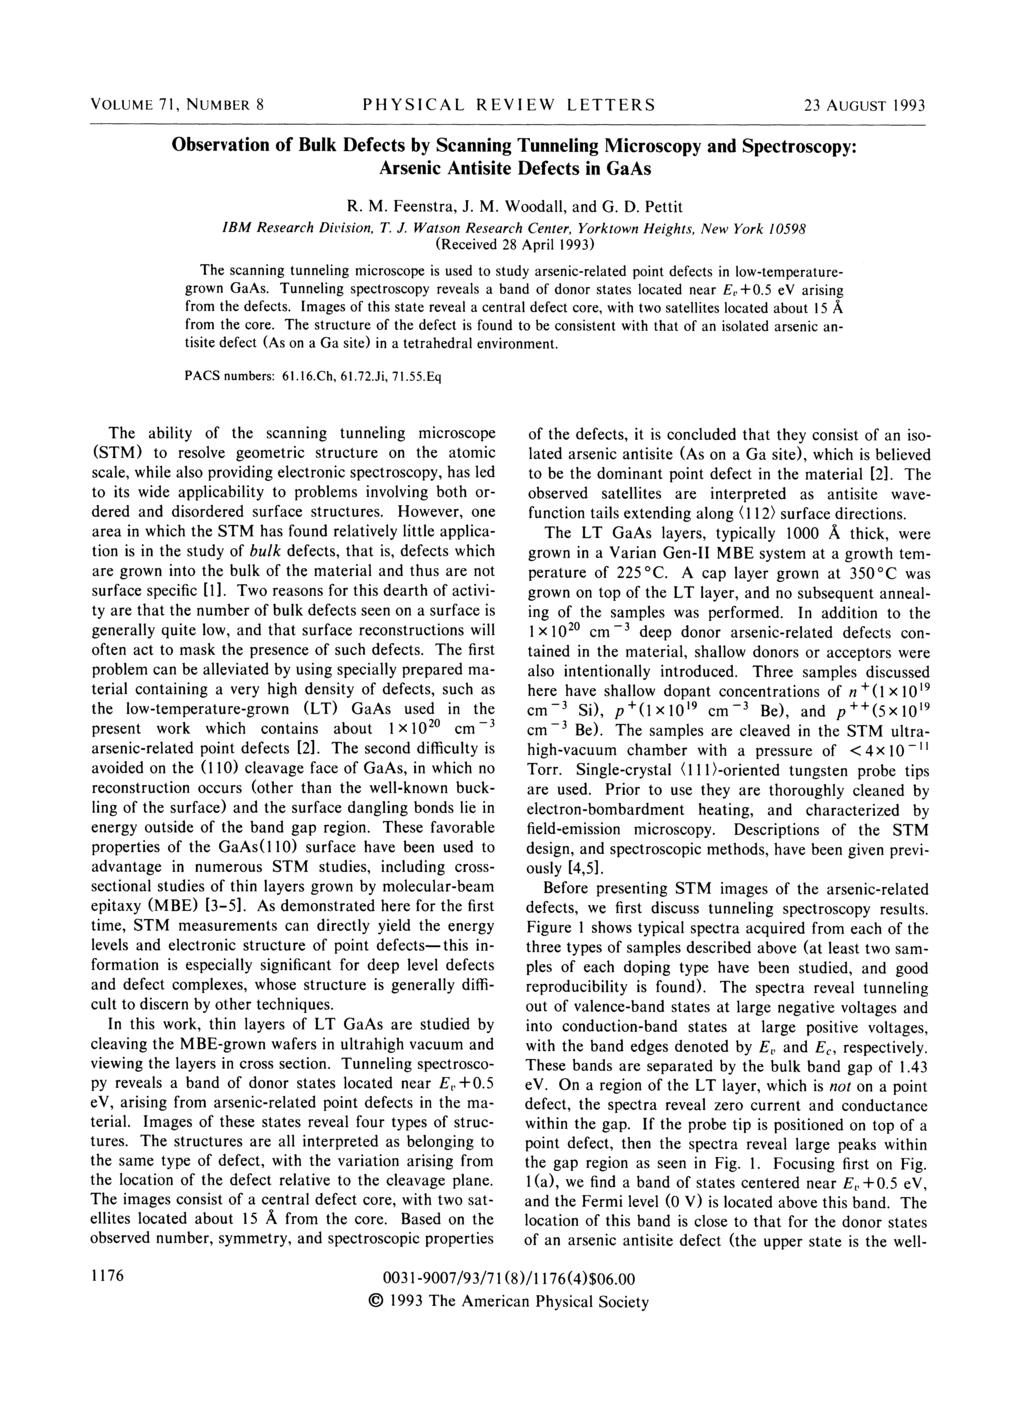 VOLUME 71, NUMBER 8 PH YSICAL REVI EW LETTERS 23 AUGUST 1993 Observation of Bulk Defects by Scanning Tunneling Microscopy and Spectroscopy: Arsenic Antisite Defects in GaAs R. M. Feenstra, J. M. Woodall, and G.